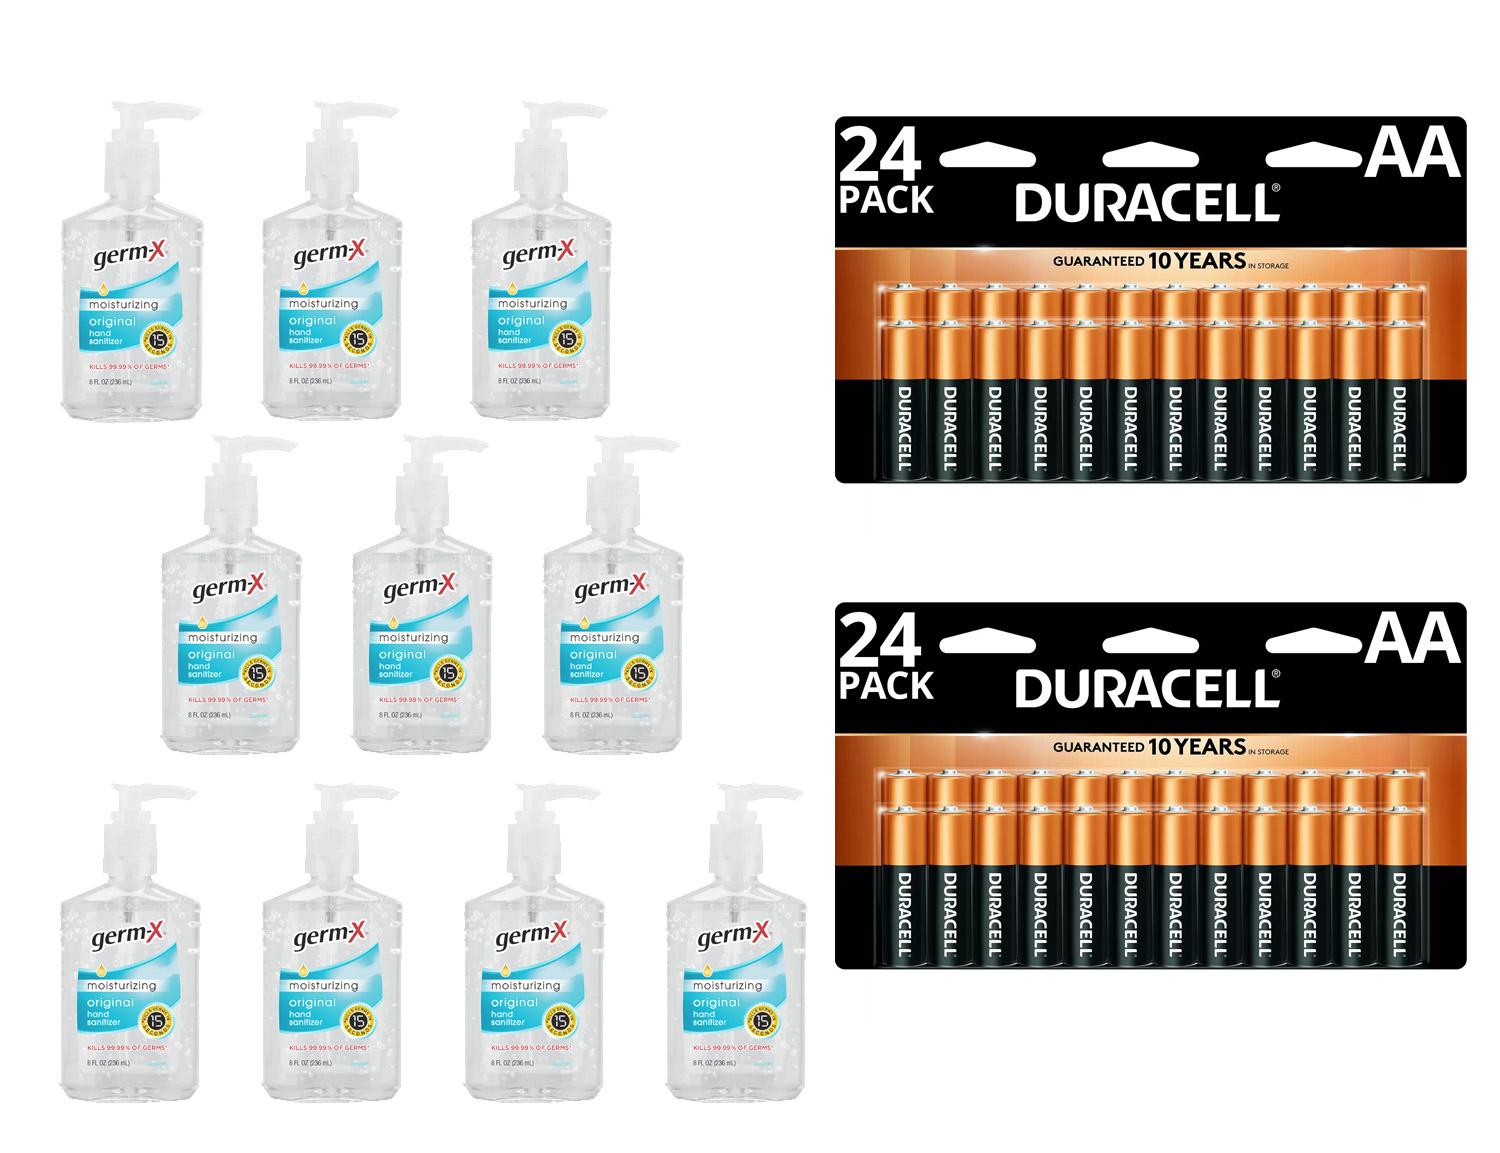 Free 10 Hand Sanitizers and 2 Duracell Battery Packs from Office Depot